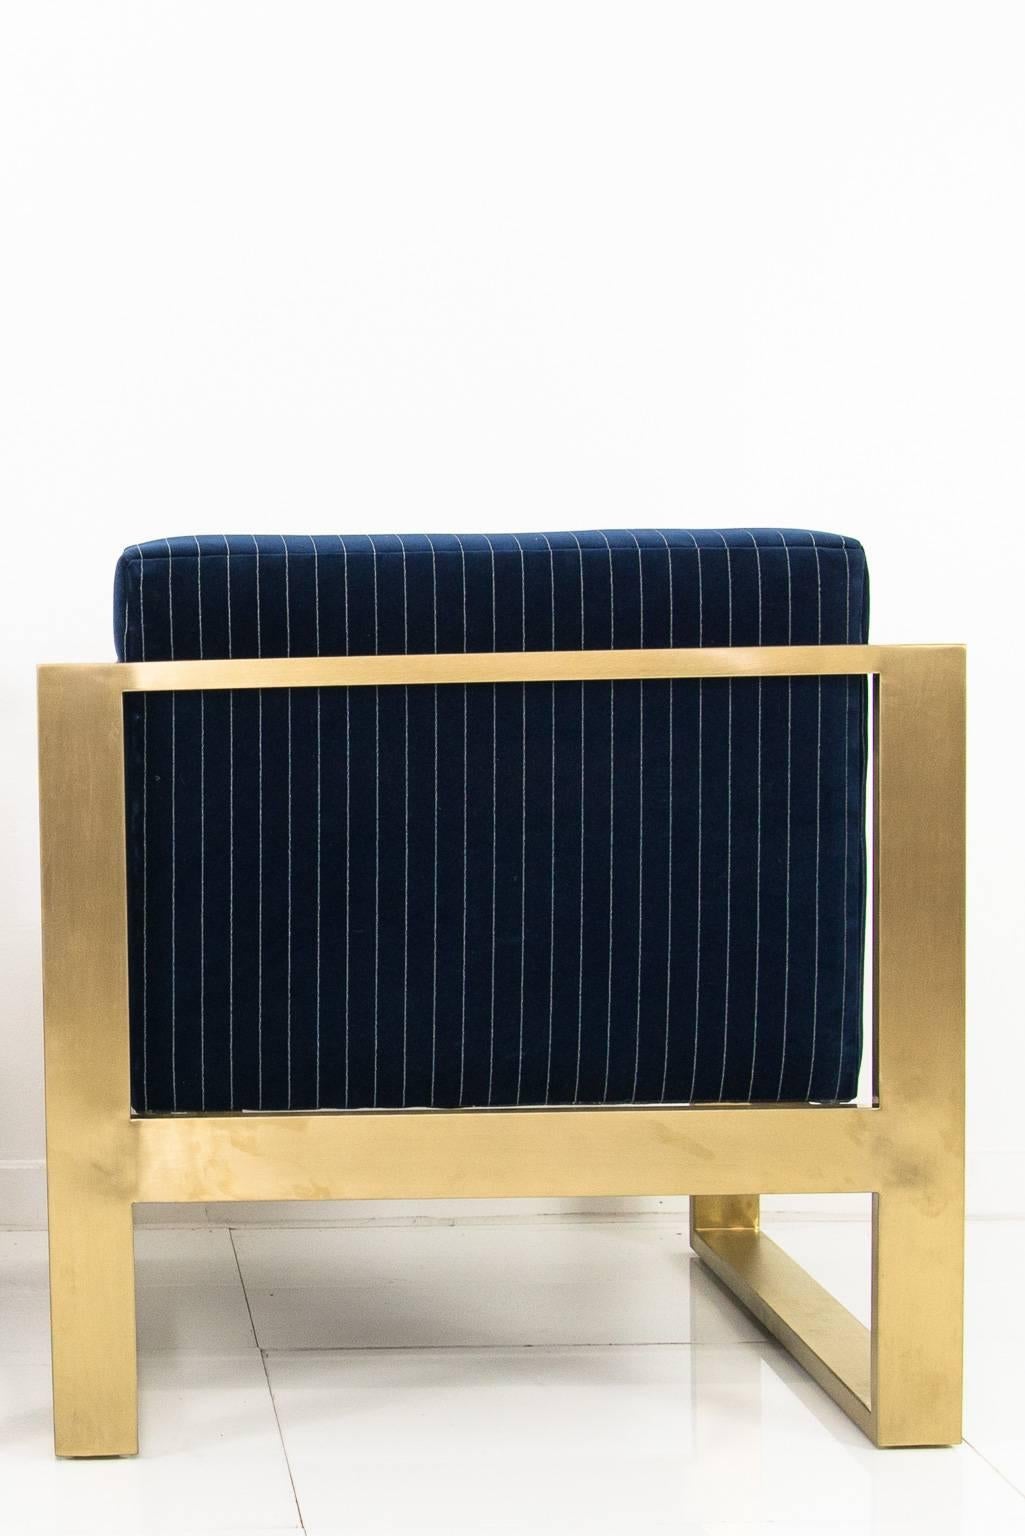 Modshop's Kube chair. Finished in navy pinstriped velvet and a brass U-leg frame.

Measures: 31.5